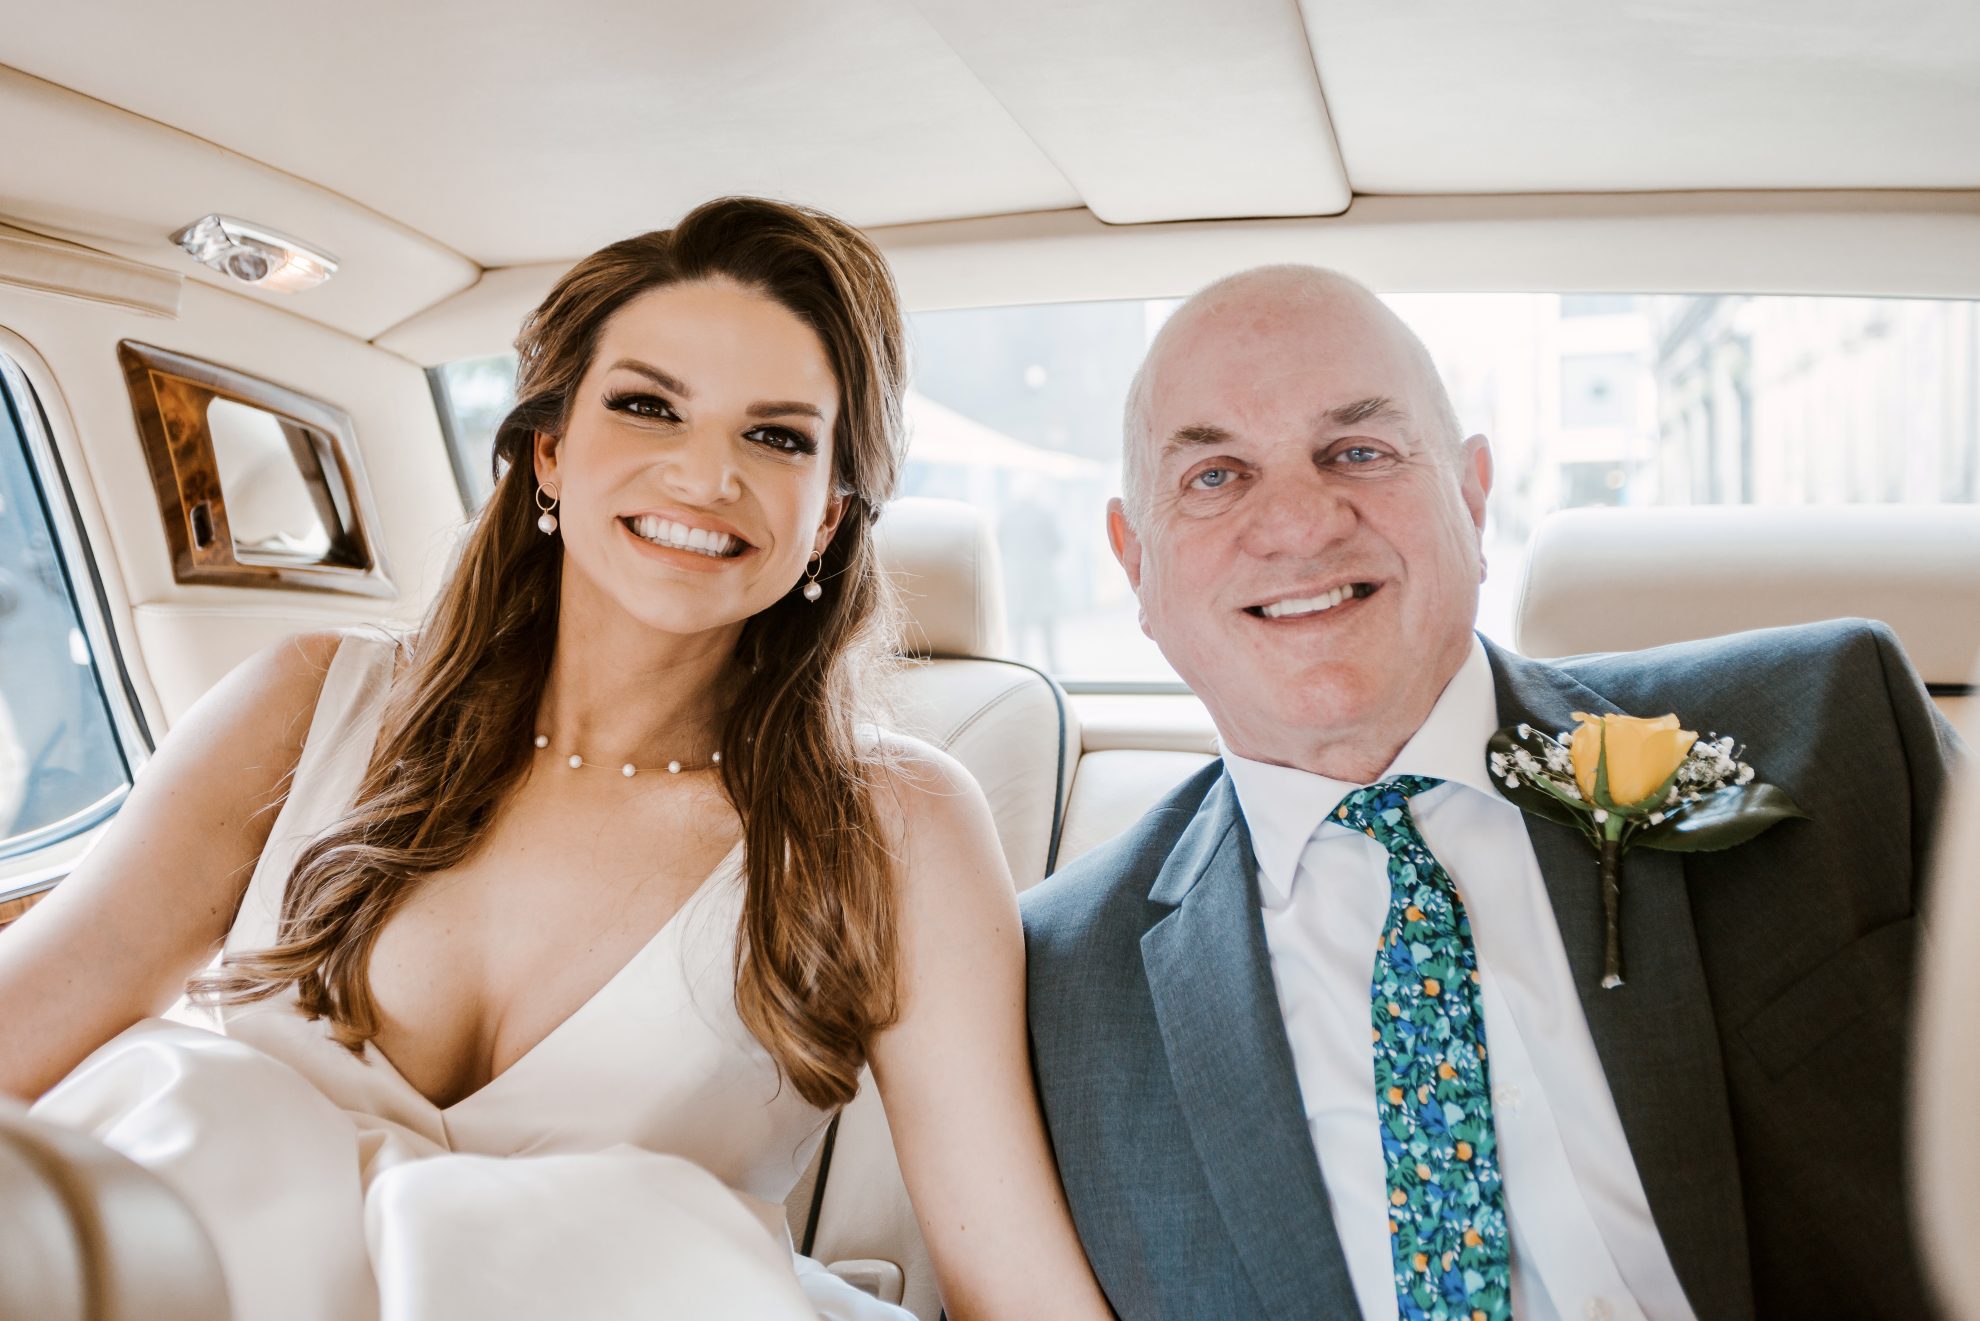 Jordan and her dad in the wedding car